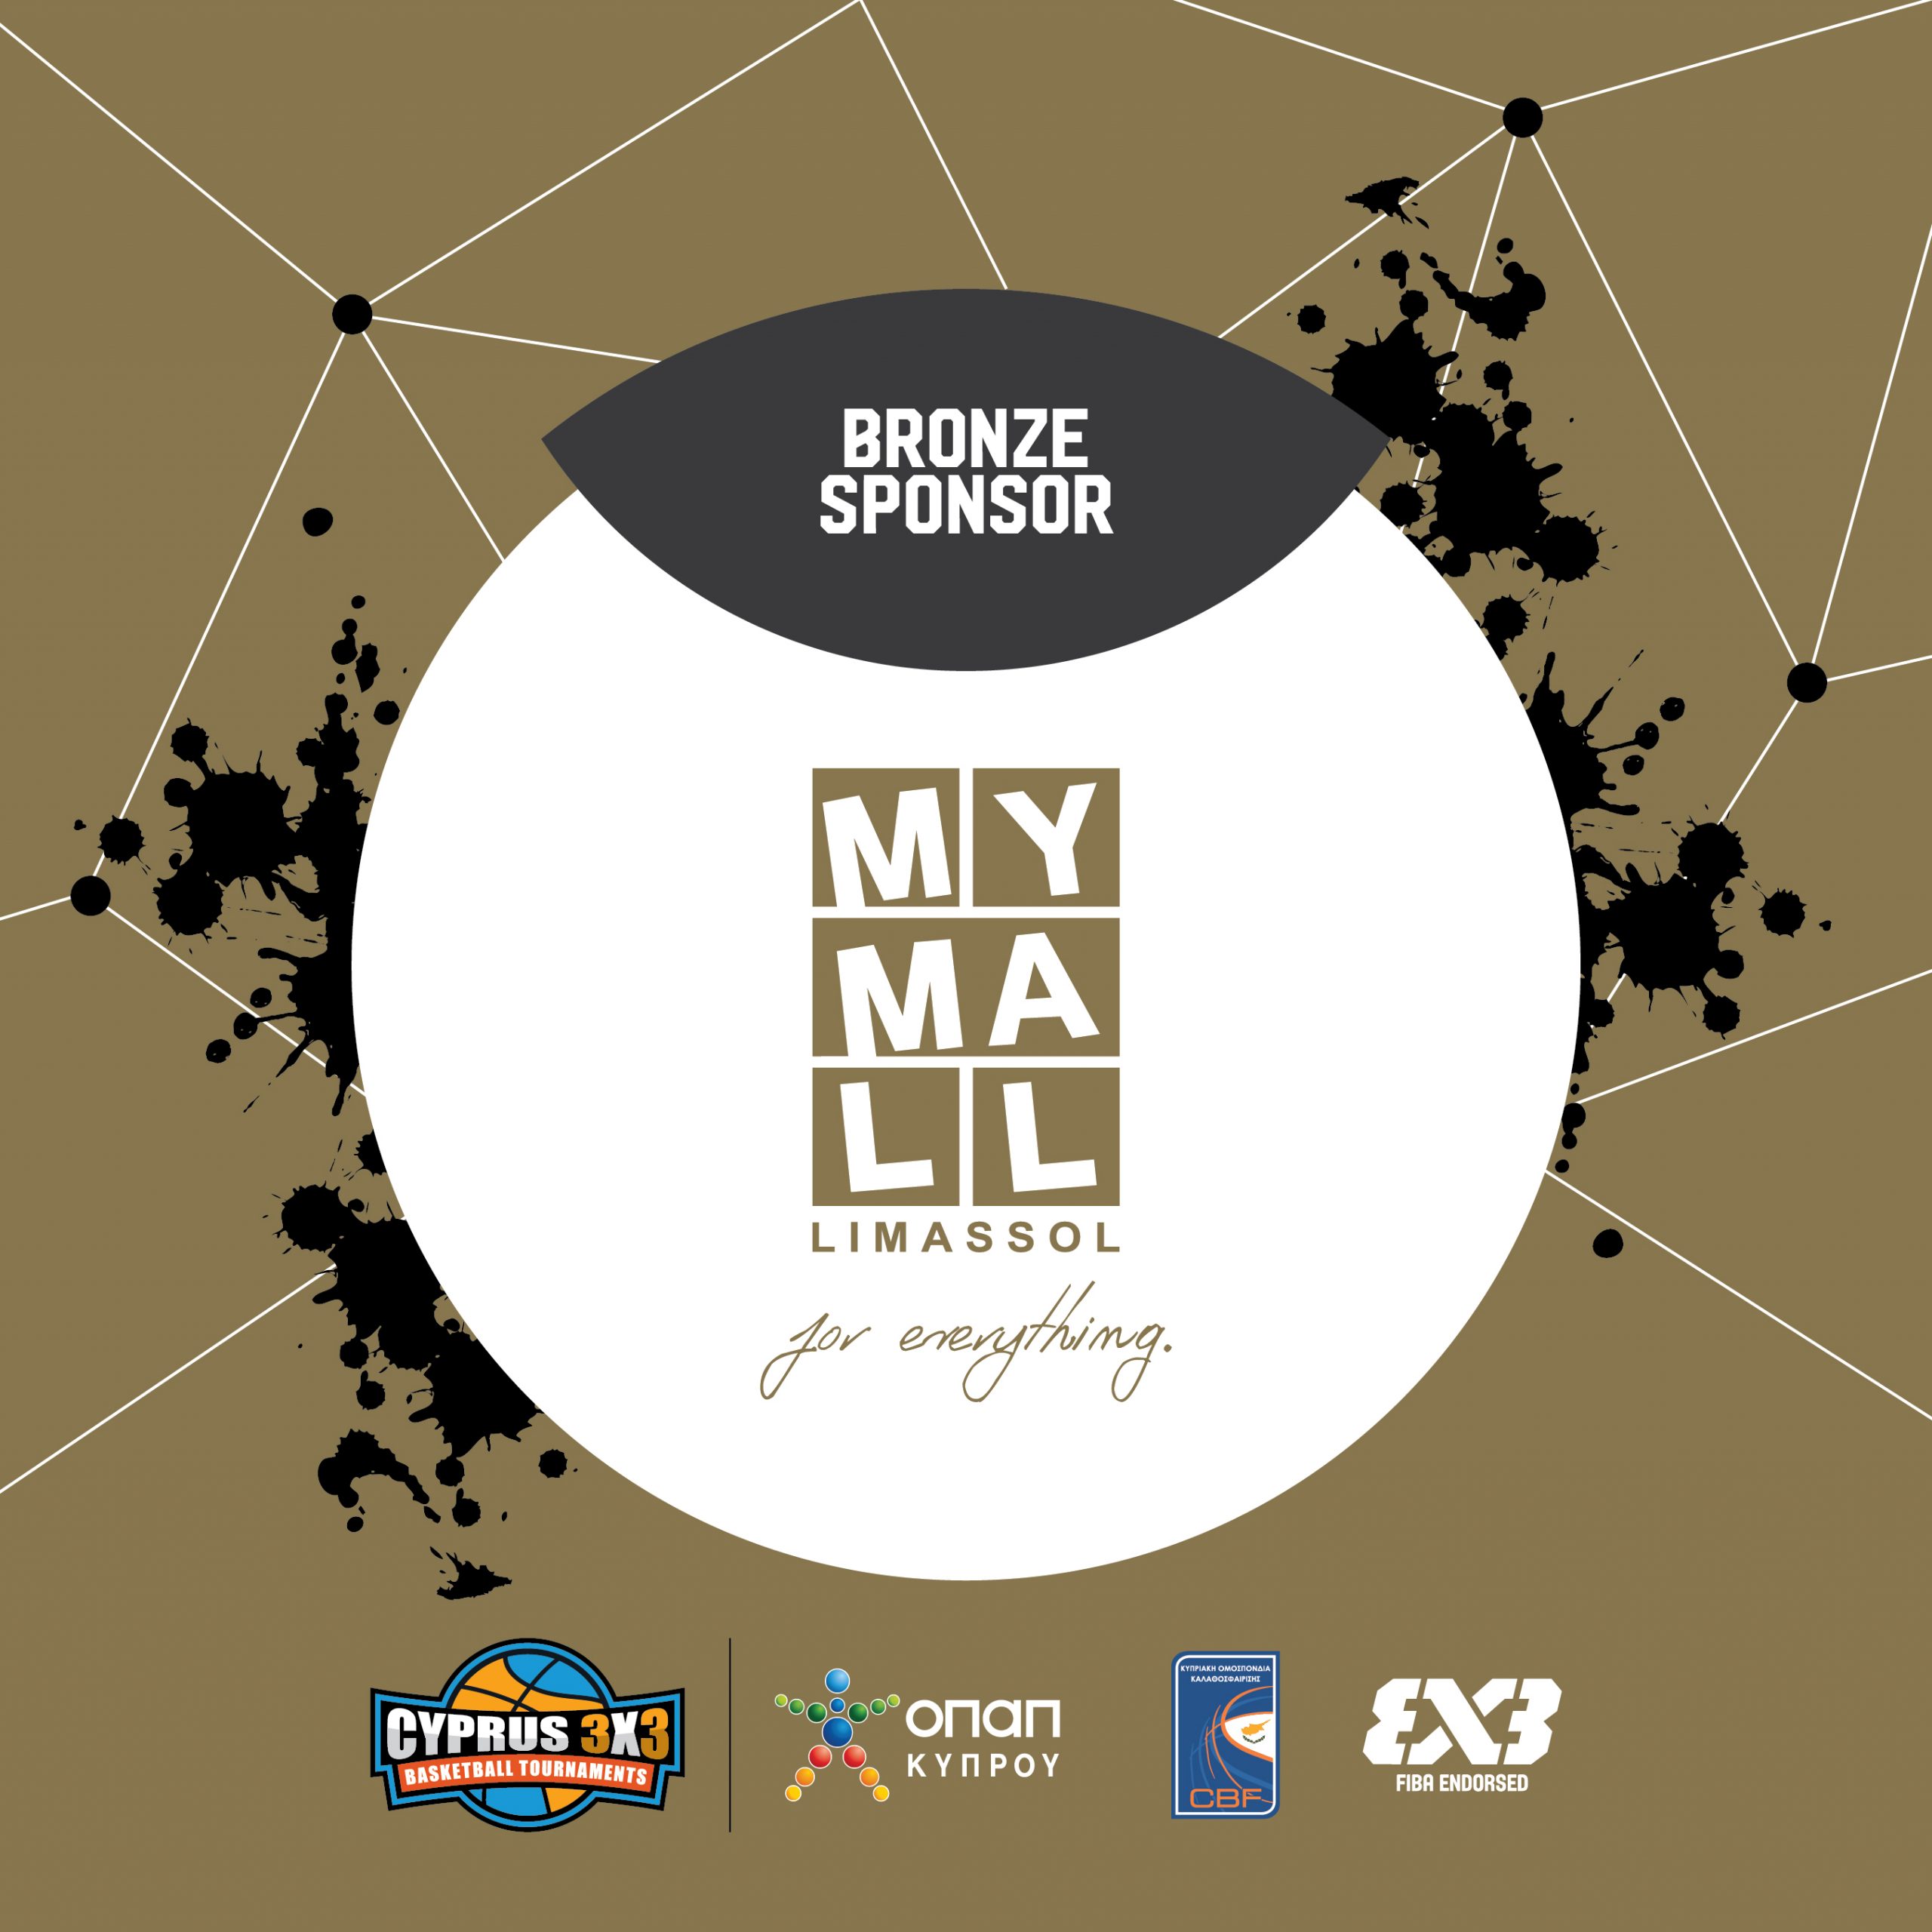 You are currently viewing Limassol’s MYMALL Supports Cyprus 3×3 as Bronze Sponsor